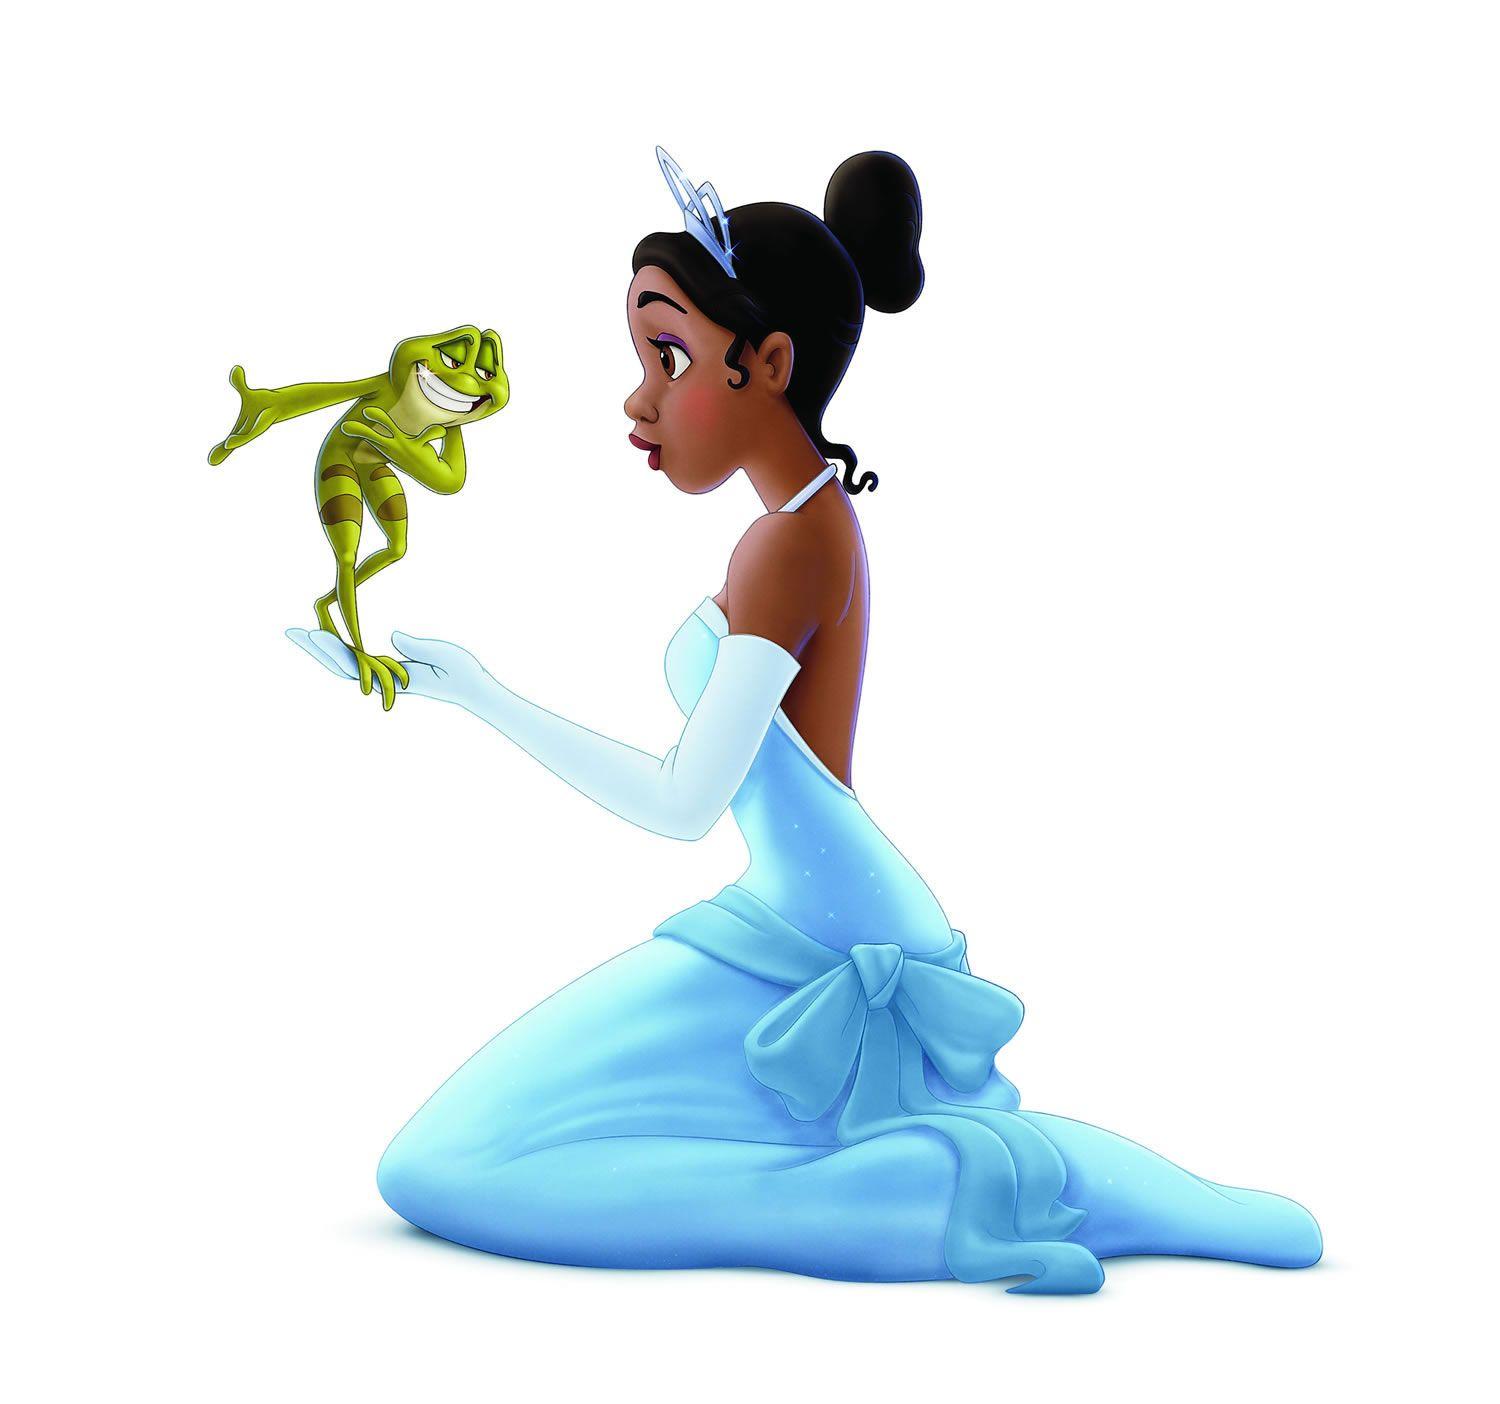 Naveen the Frog and Tiana from Disney's Princess and the Frog